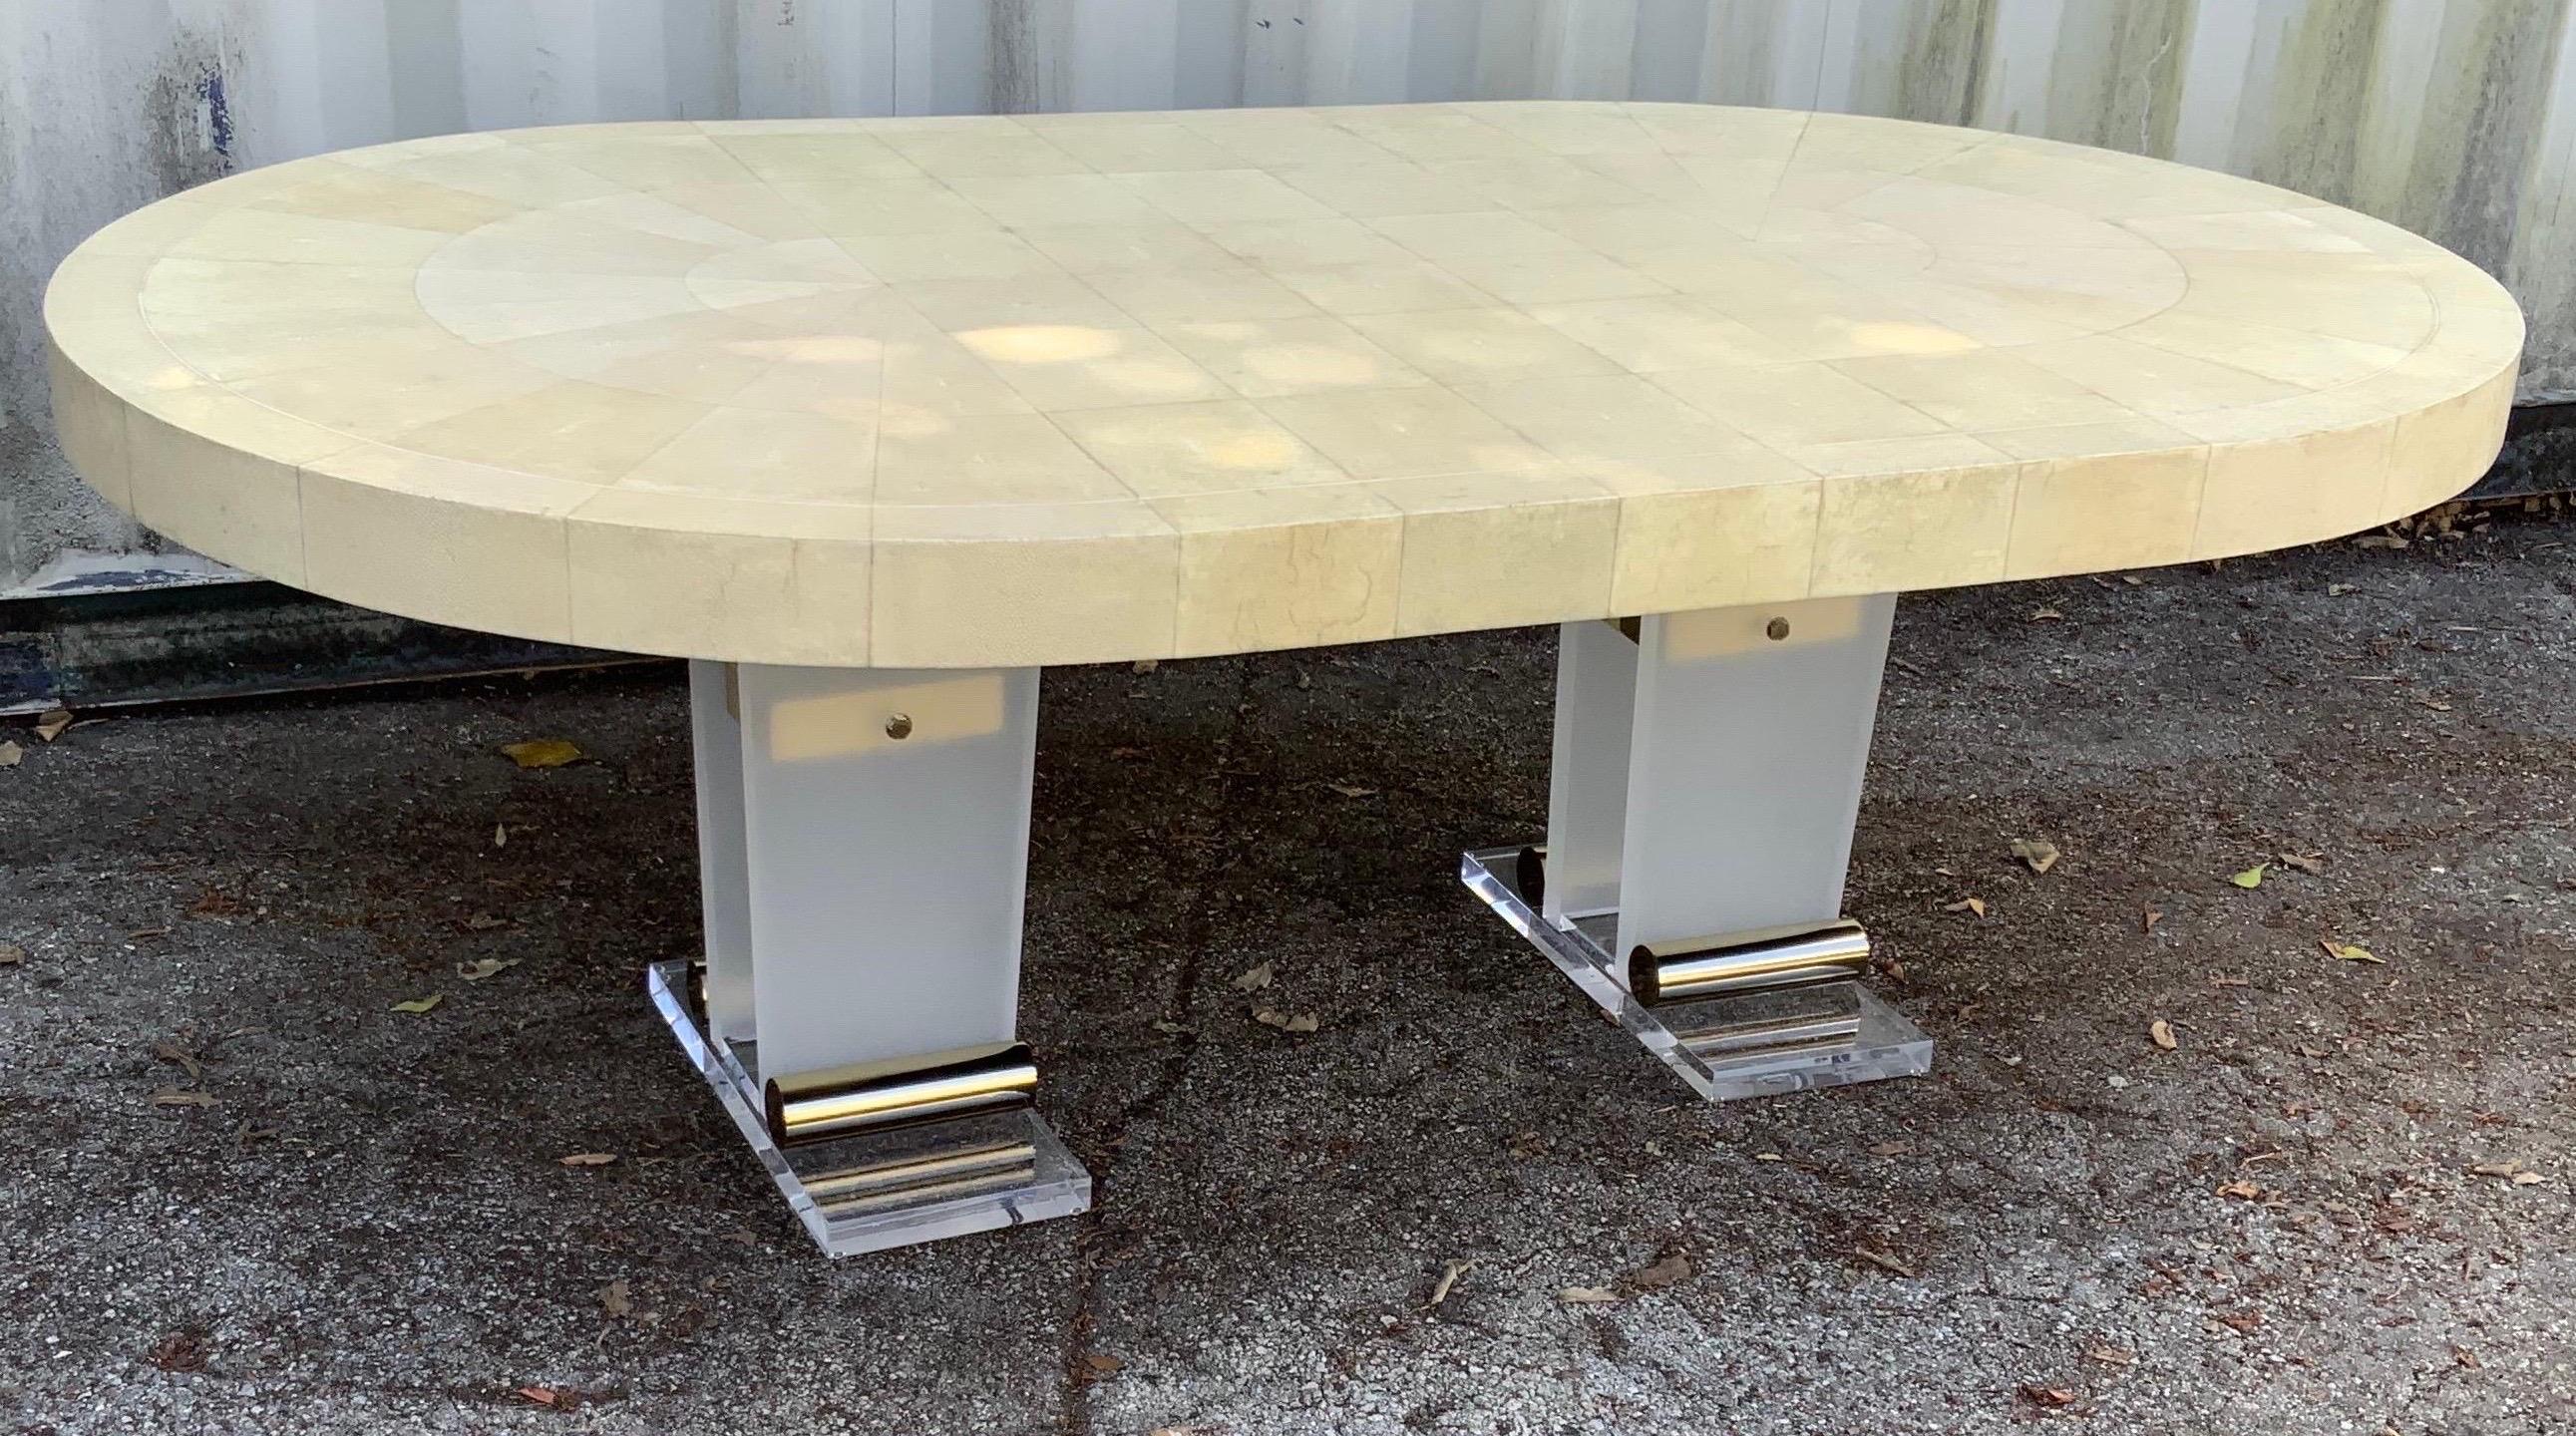 Beautiful Ron Seff Art Deco Style dining room table, can also be used as a desk.
Shagreen top and lucite legs with brass accent.